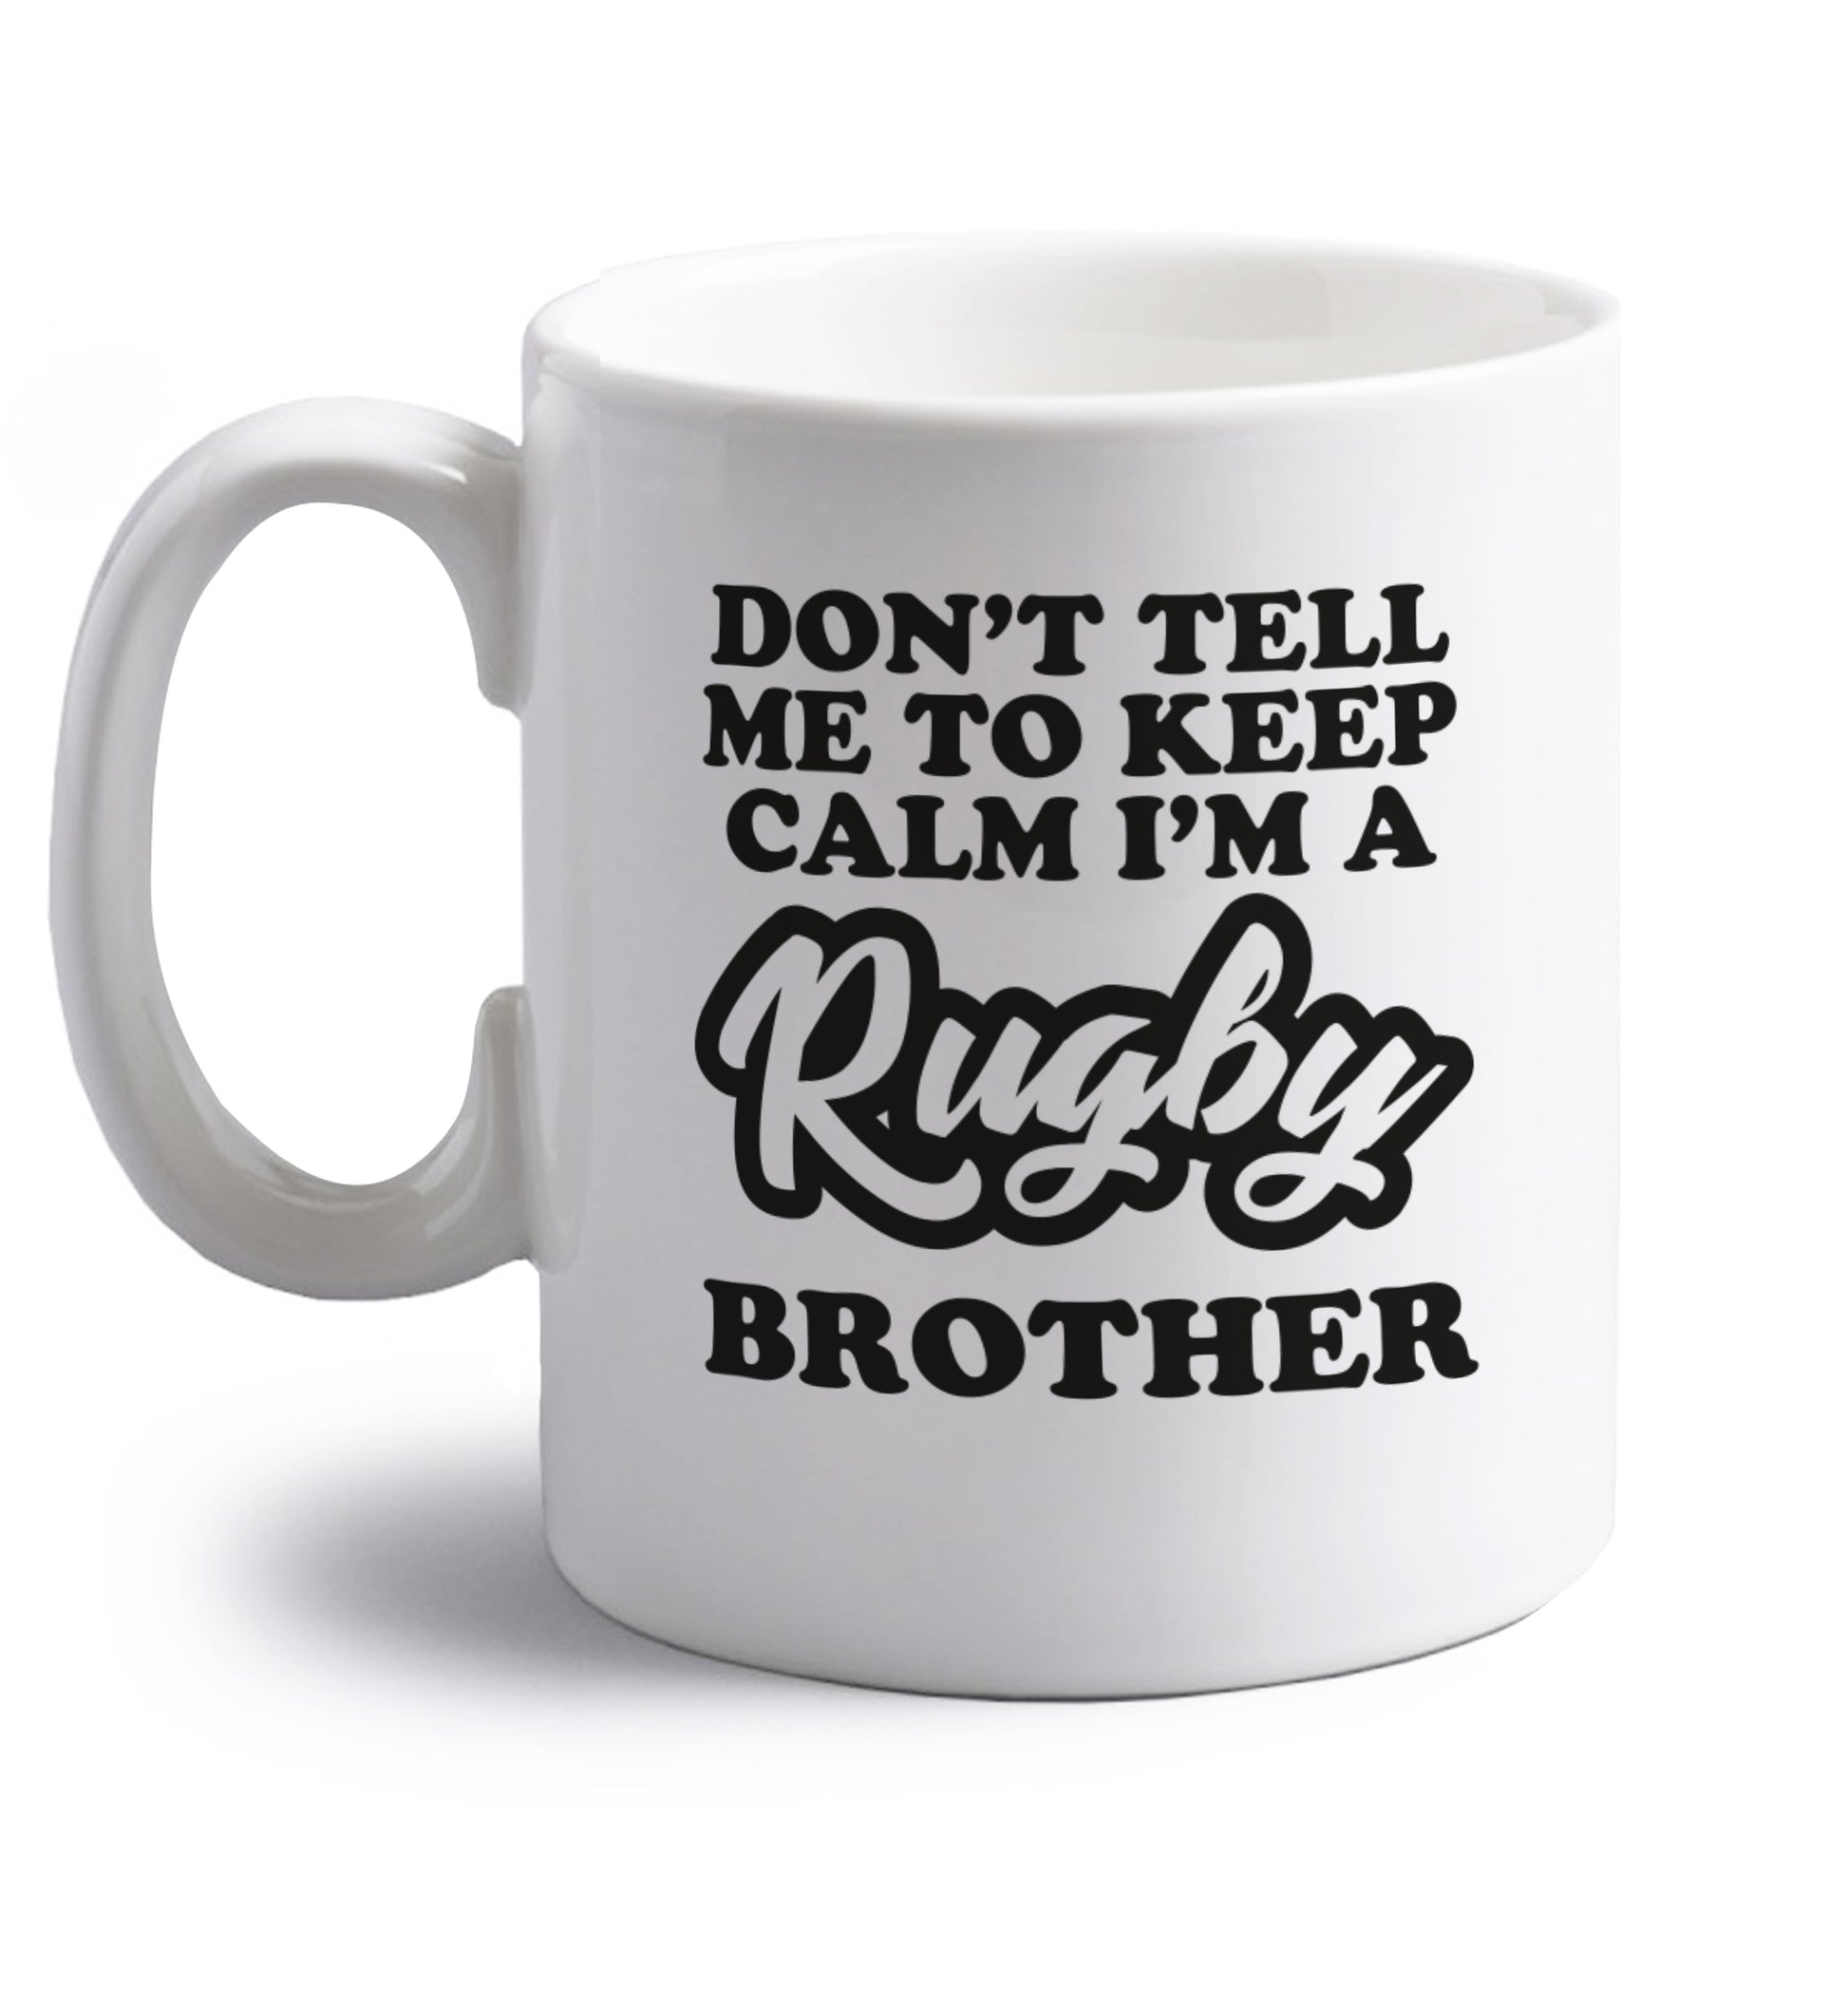 Don't tell me keep calm I'm a rugby brother right handed white ceramic mug 